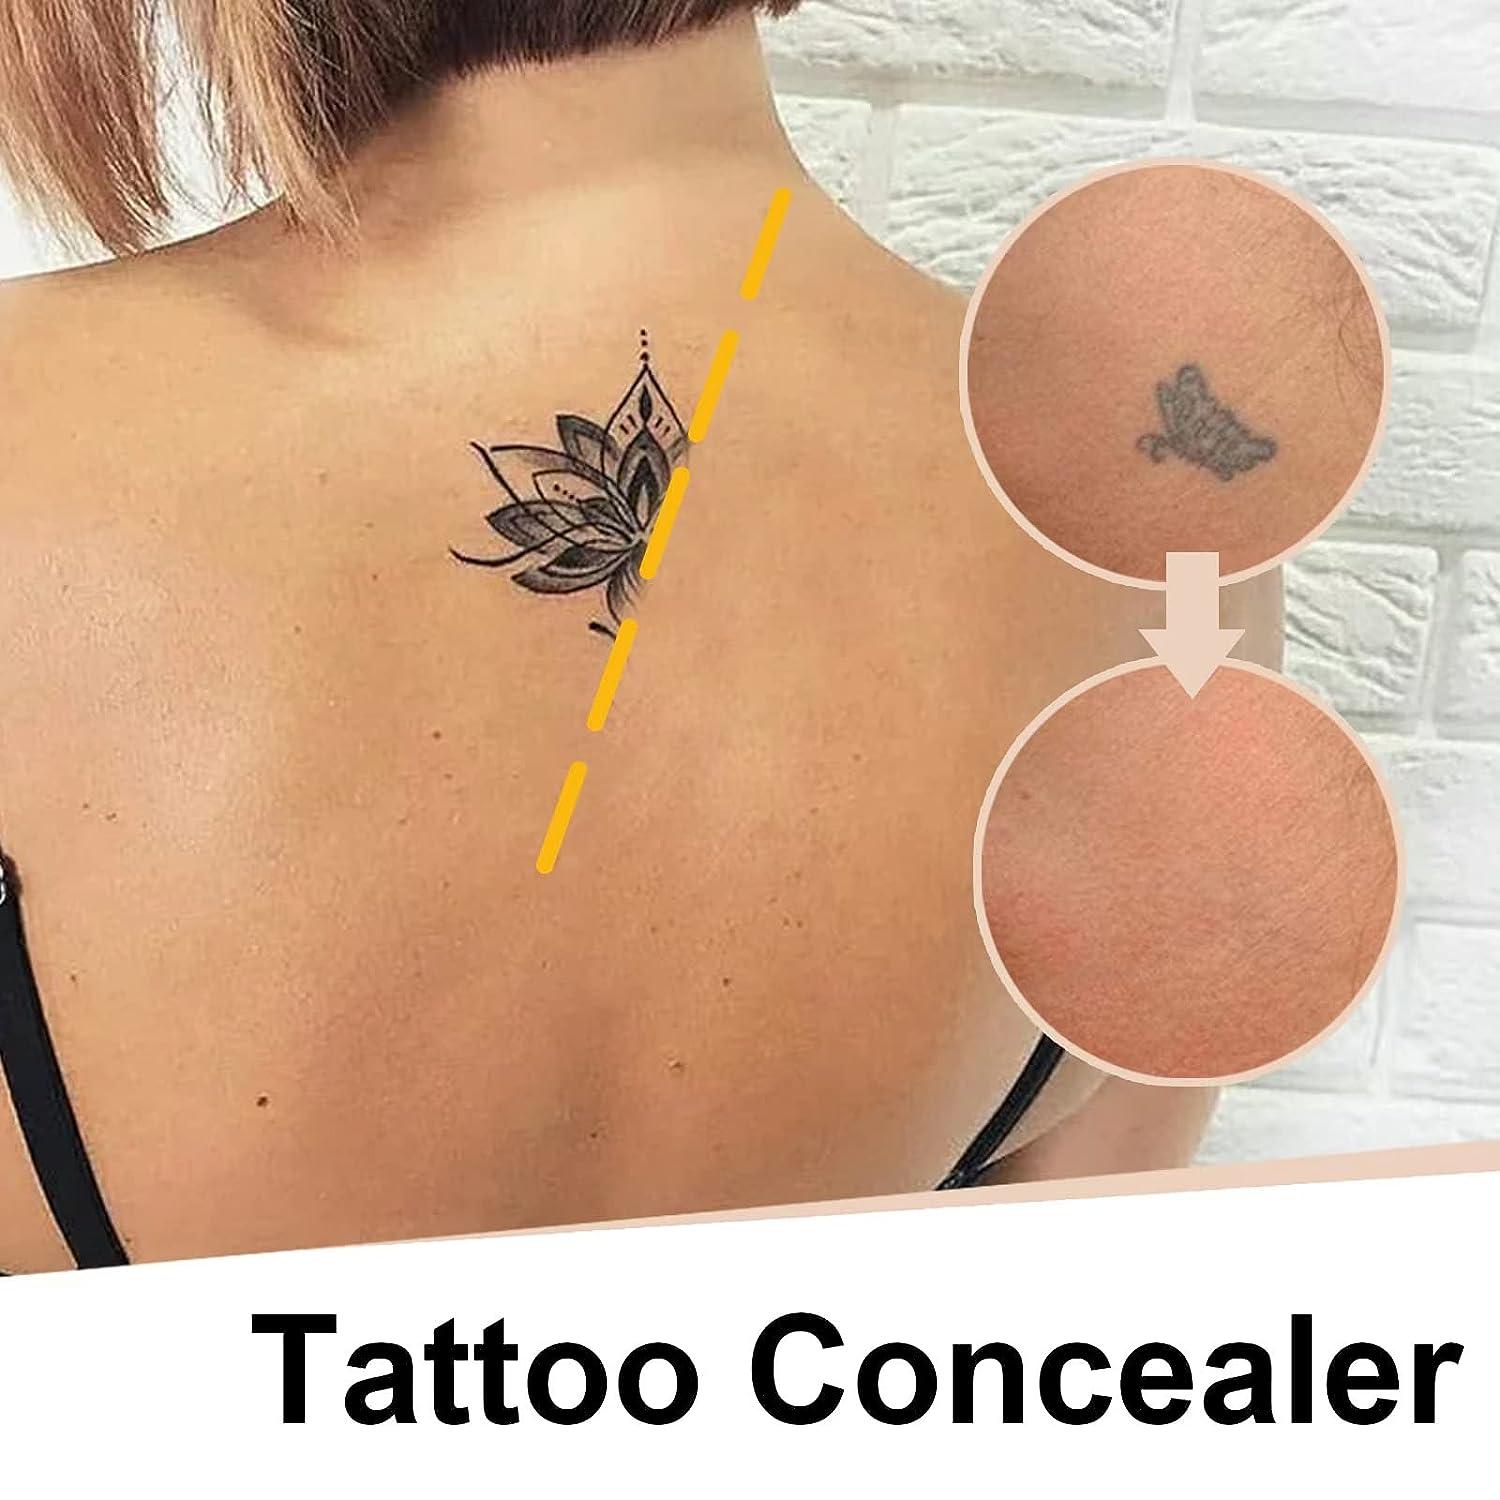 Amazon.com : Tattoo Cover Up, Tattoo Concealer for Dark Spots, Scars,  Vitiligo, and More, a Set of 2 Colors, Long Lasting & Waterproof : Beauty &  Personal Care